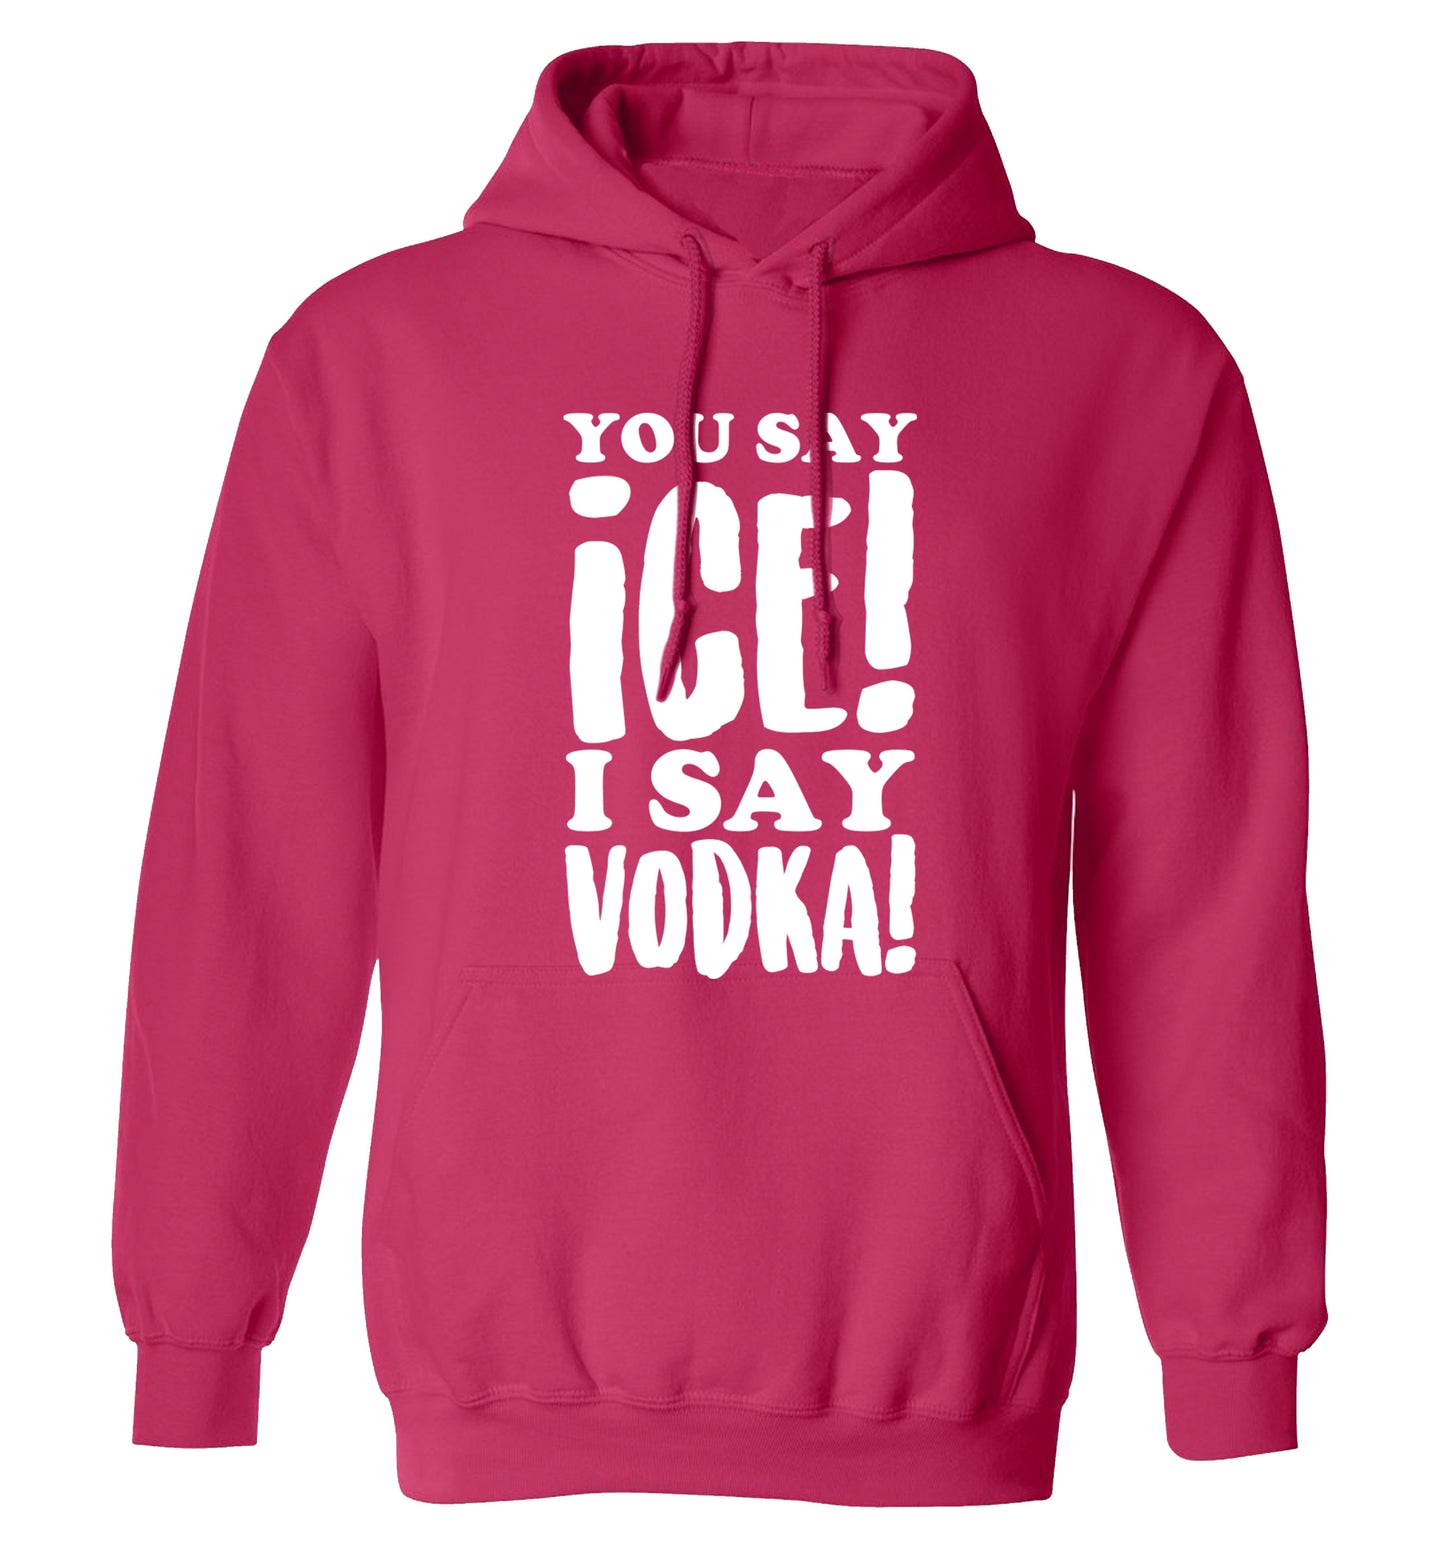 You say ice I say vodka! adults unisex pink hoodie 2XL